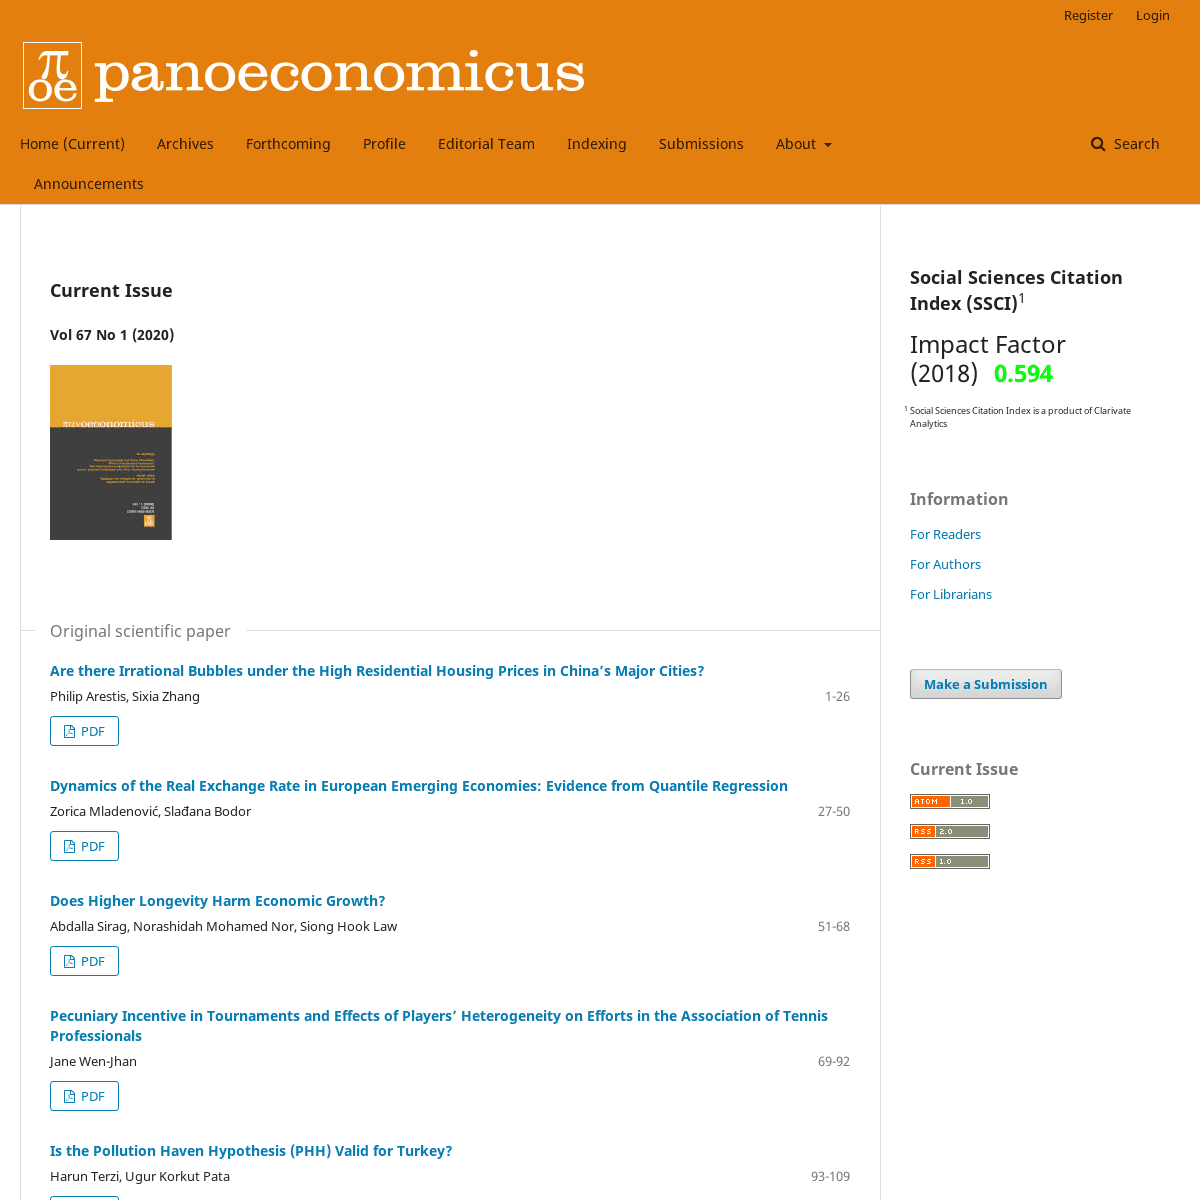 A complete backup of panoeconomicus.org